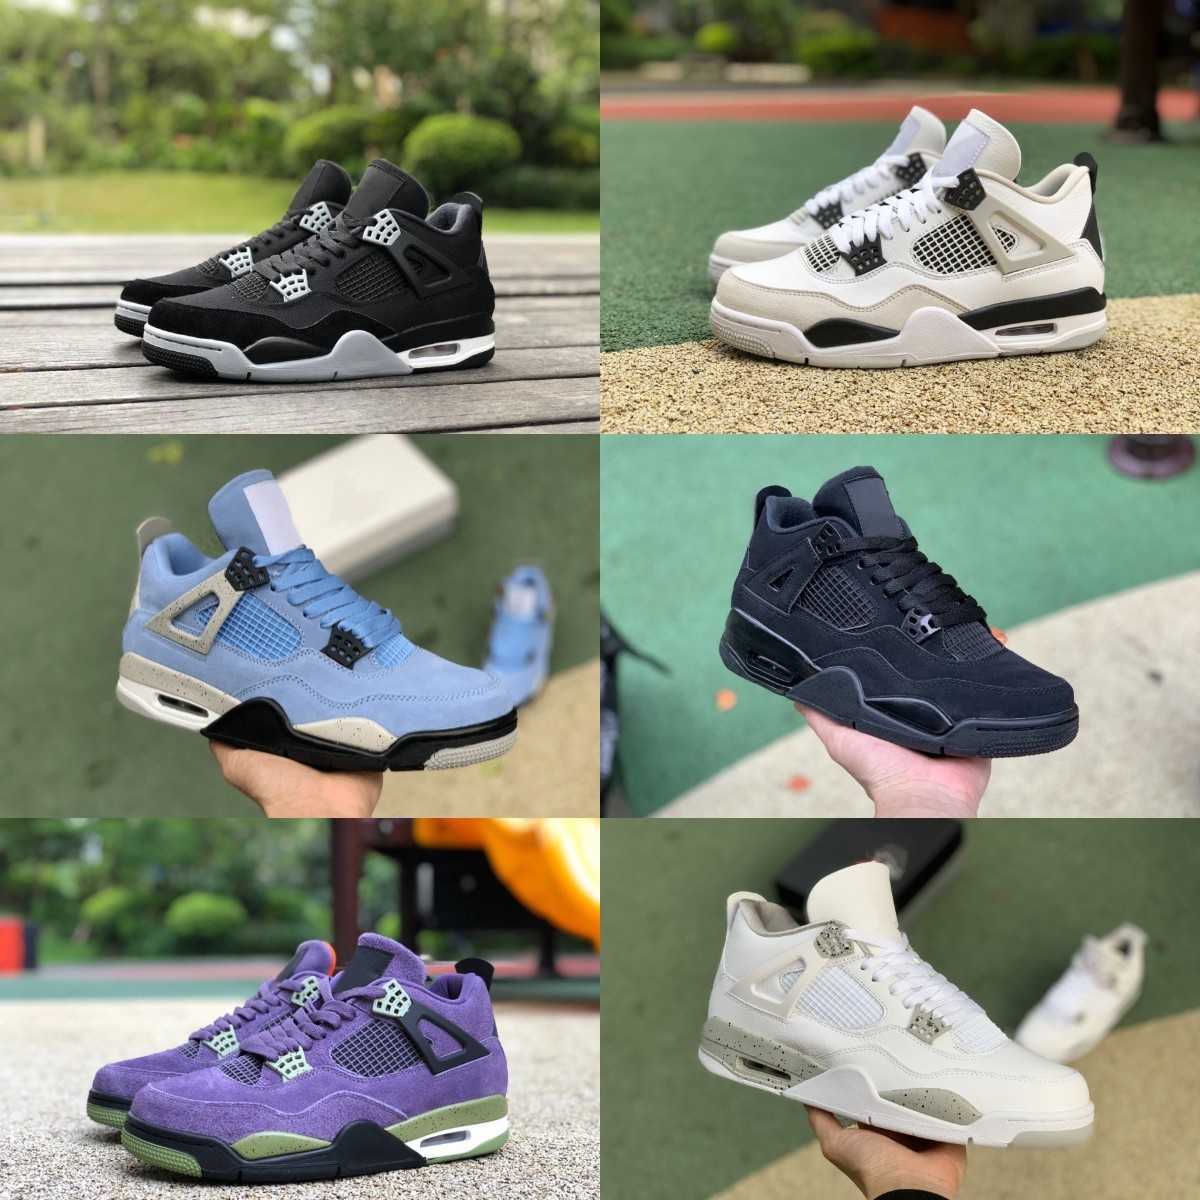 

2023 Jumpman Black Canvas 4 4s Basketball Shoes University Blue Mens Military Red Thunder Cement Cat Cream Sail White Oreo Infrared Canyon Purple Trainer Sneakers S6, Please contact us